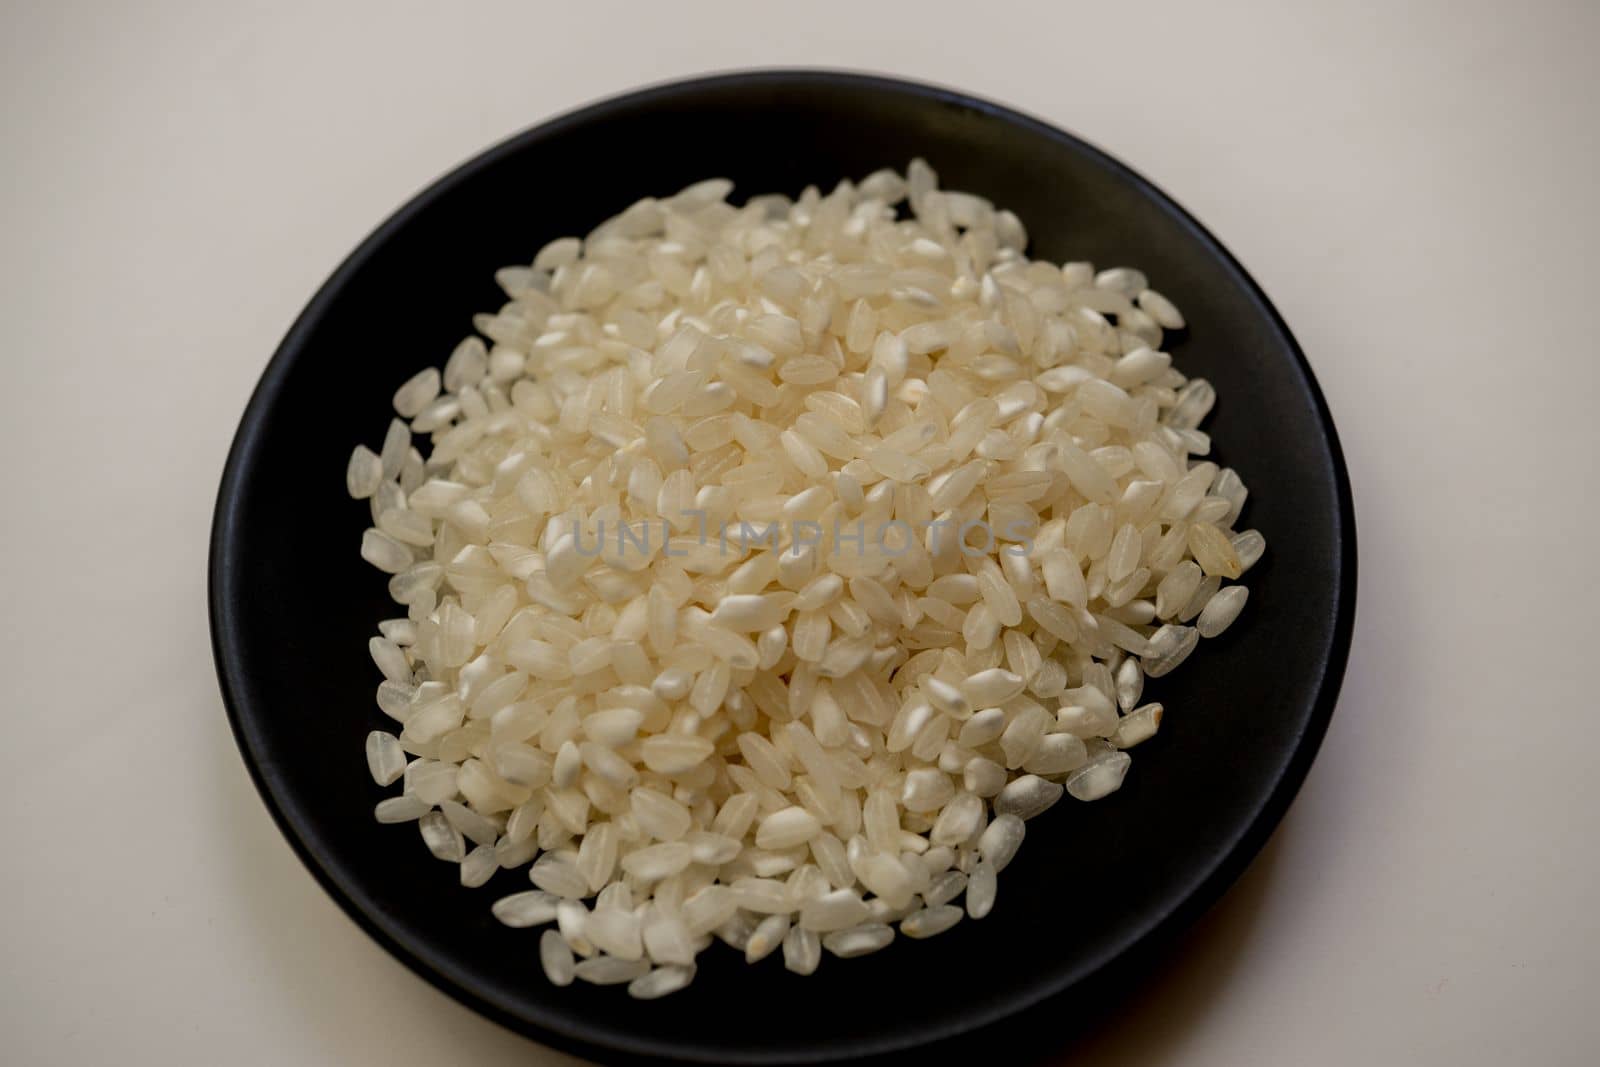 pile of rice on a black plate with a white background